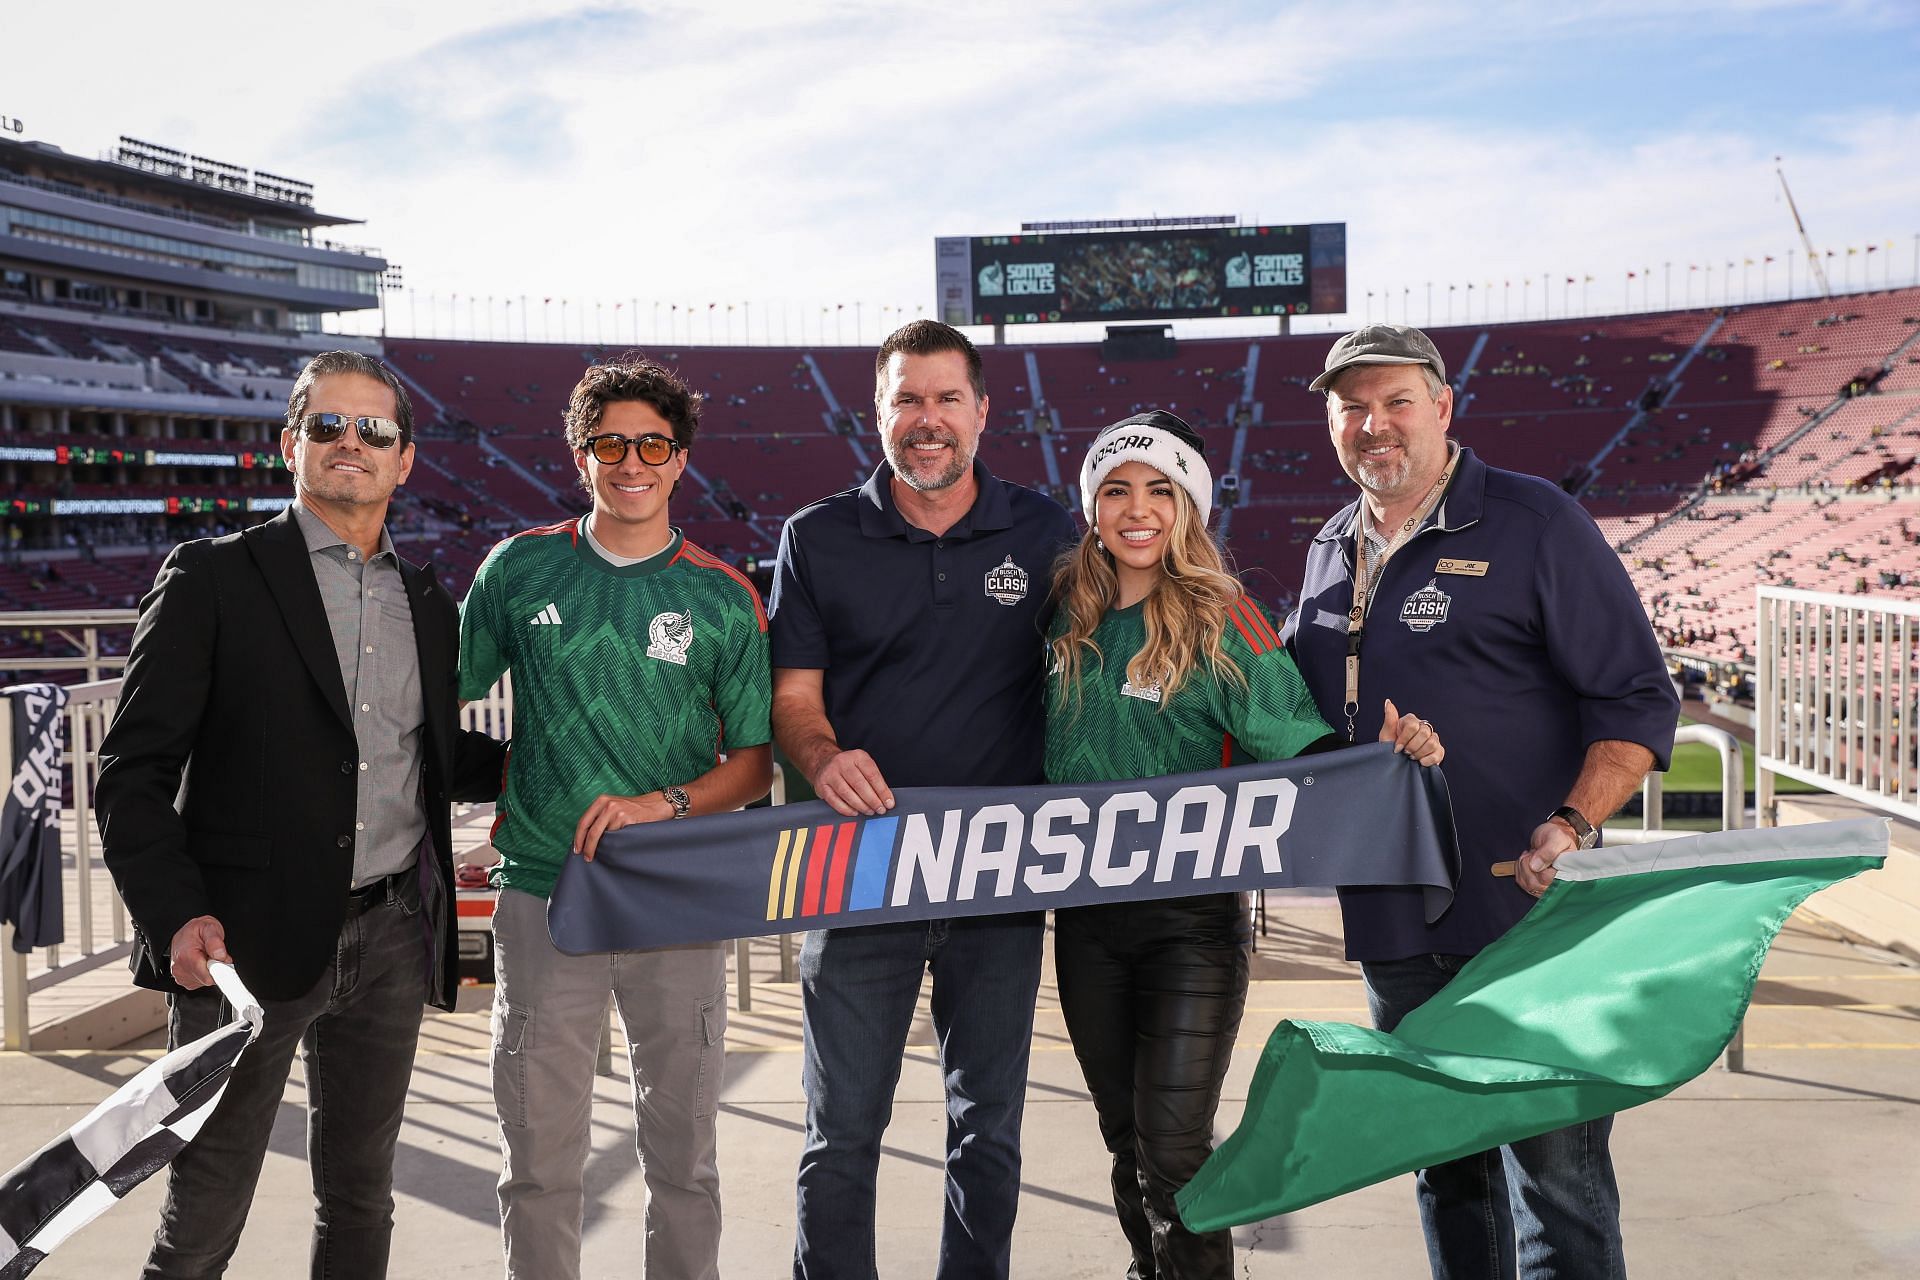 Ground Breaking Ceremony for the L.A. Coliseum NASCAR track